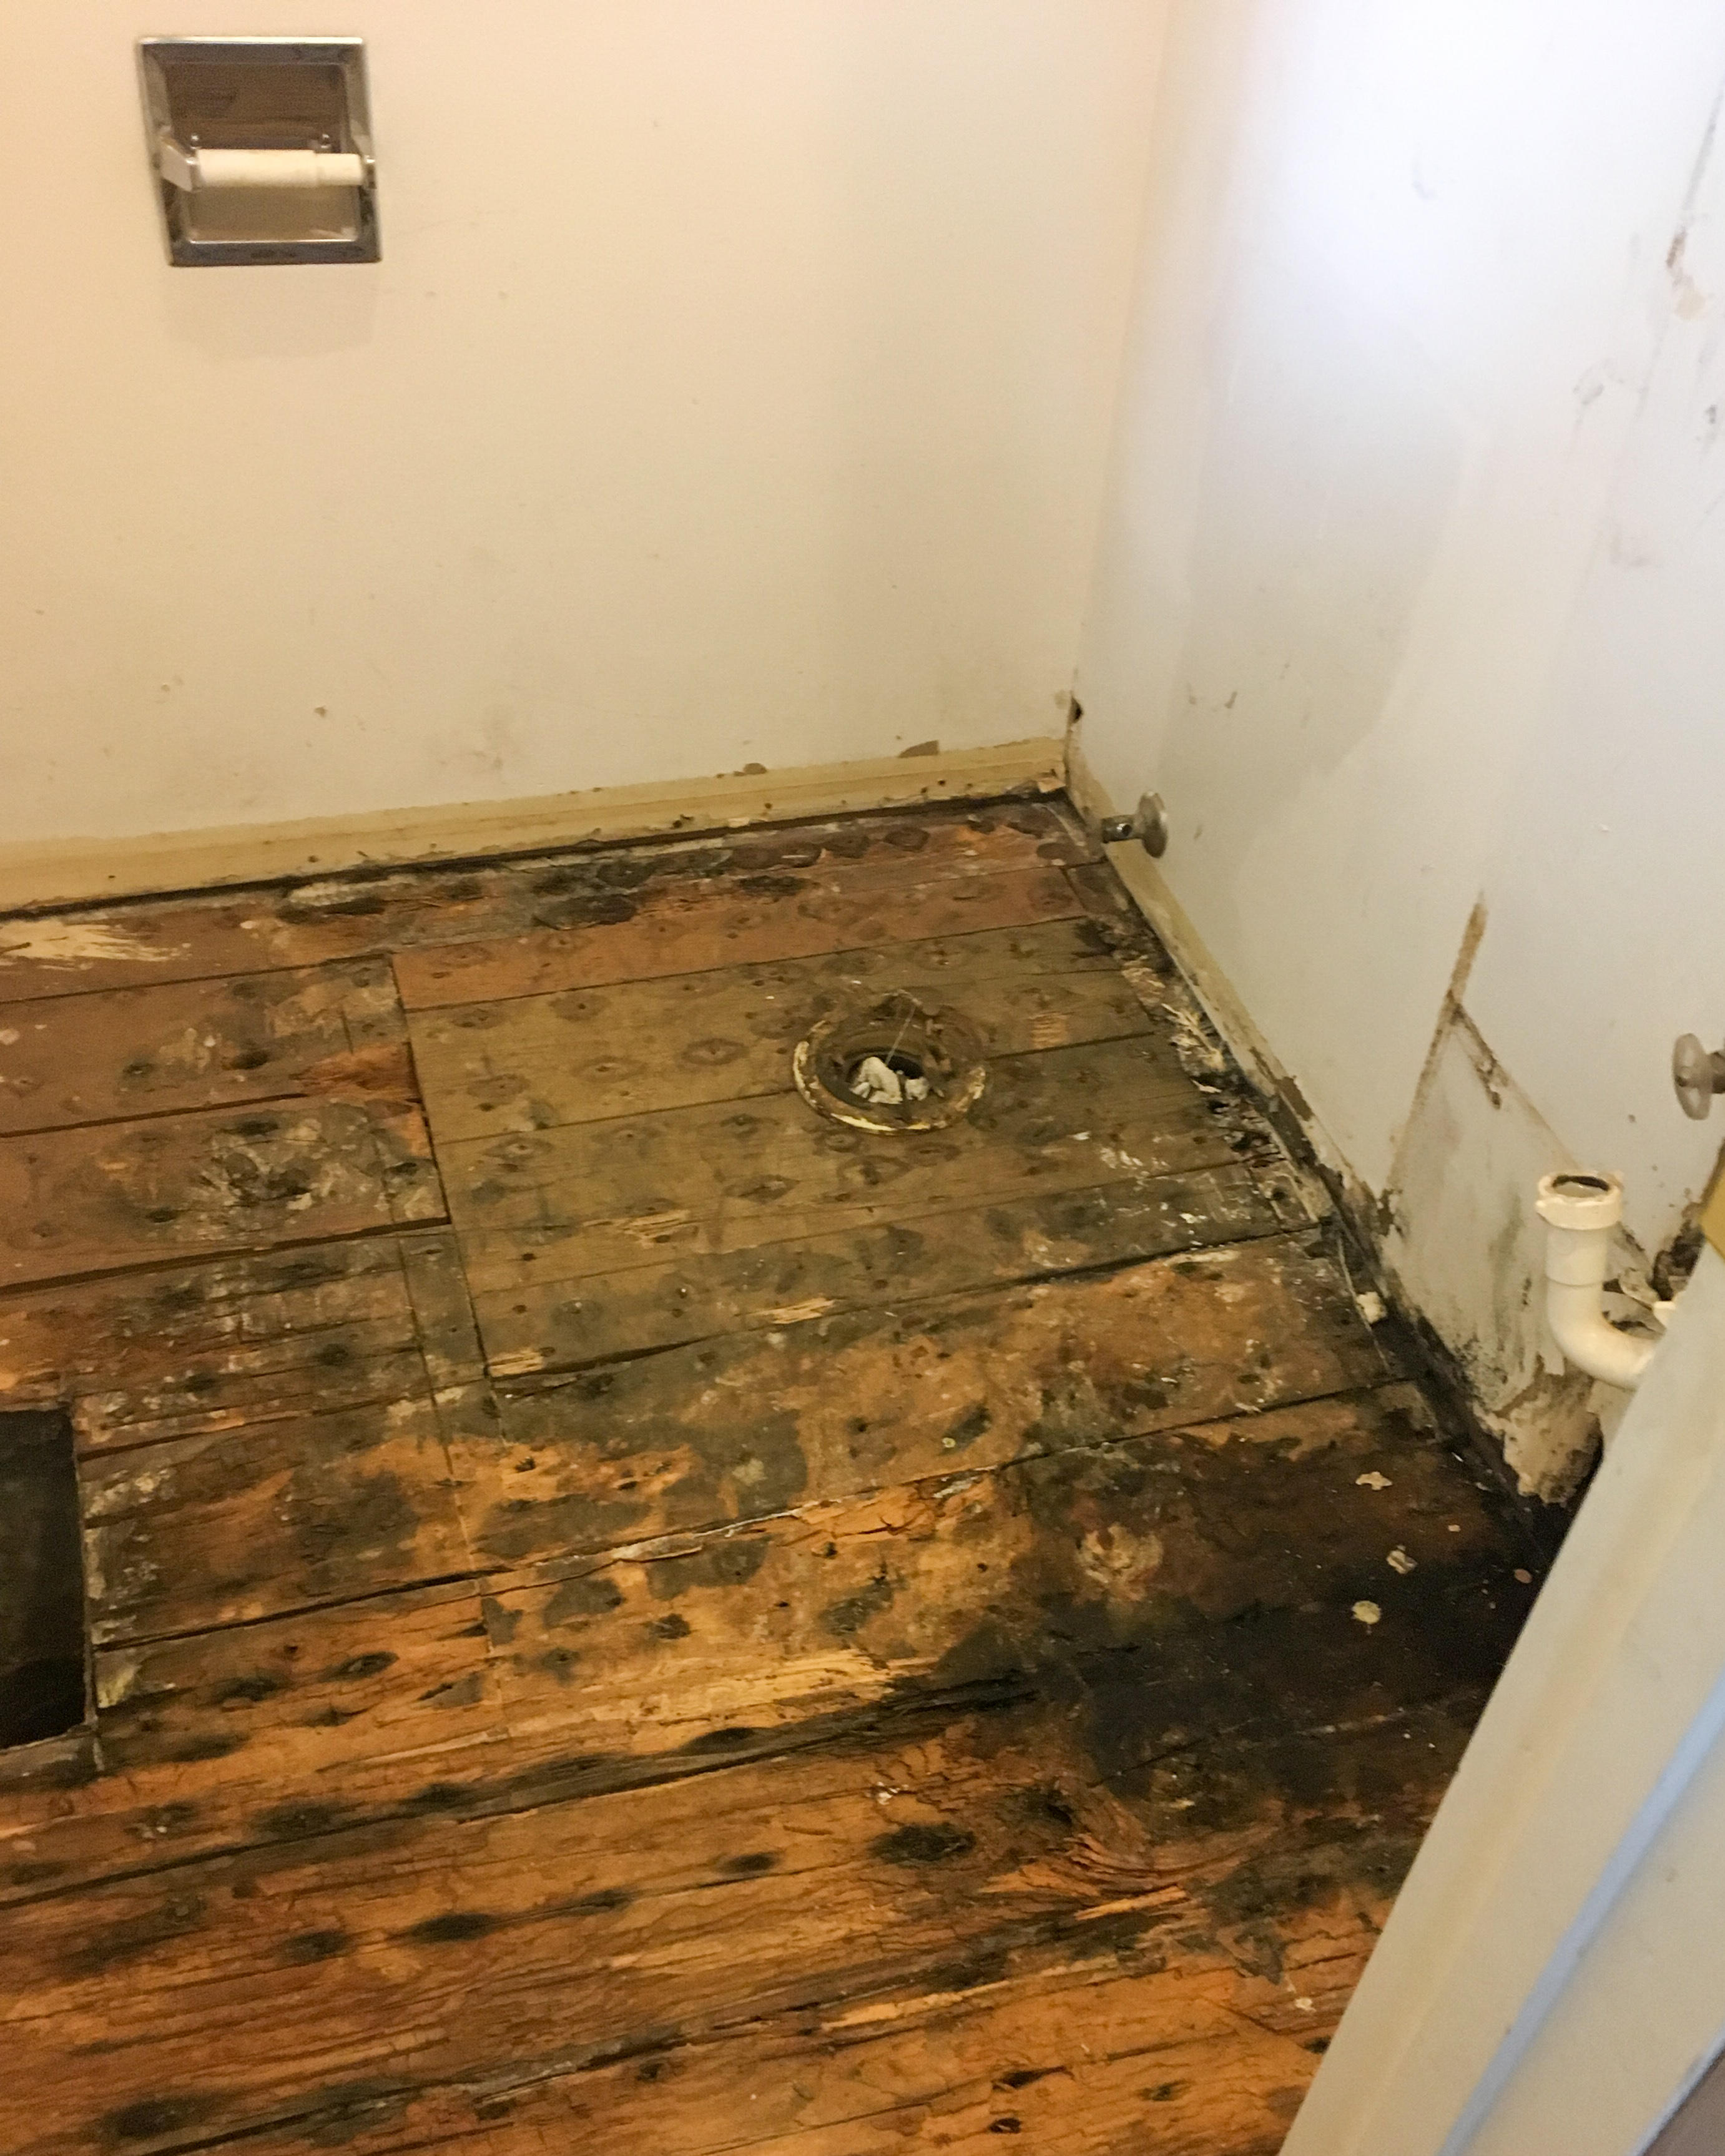 Once your home has a mold infestation, quick cleanup and remediation are vital to keeping the damage at a minimum and spreading to non-affected areas. If you have any questions or would like to schedule service for your Richmond Highlands, WA home, please give SERVPRO of Shoreline/Woodinville a call.